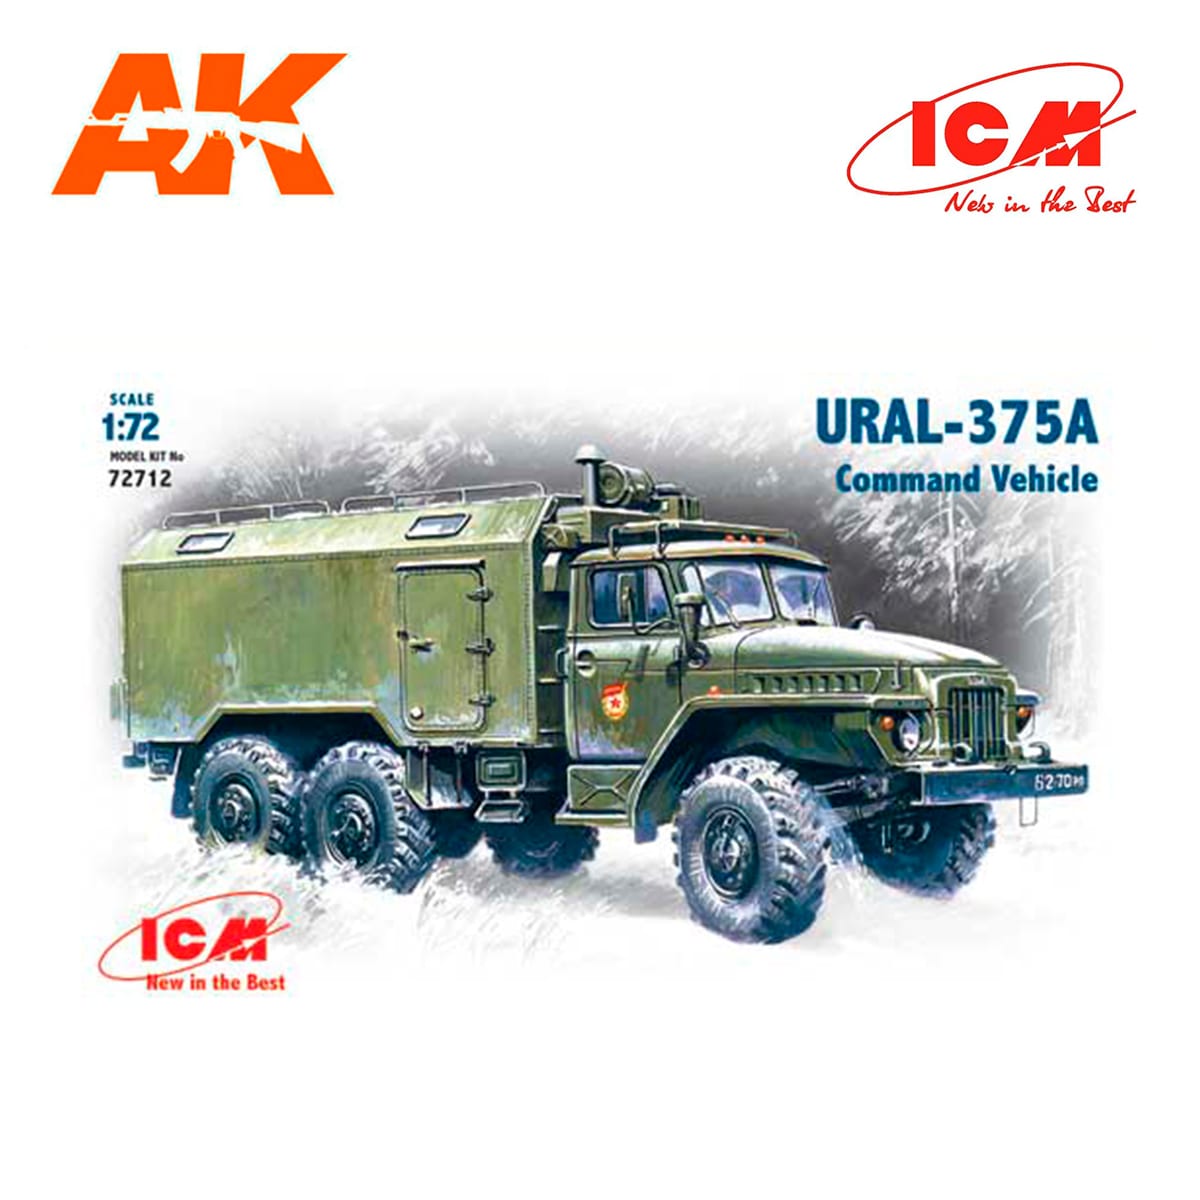 URAL-375A, Command Vehicle 1/72